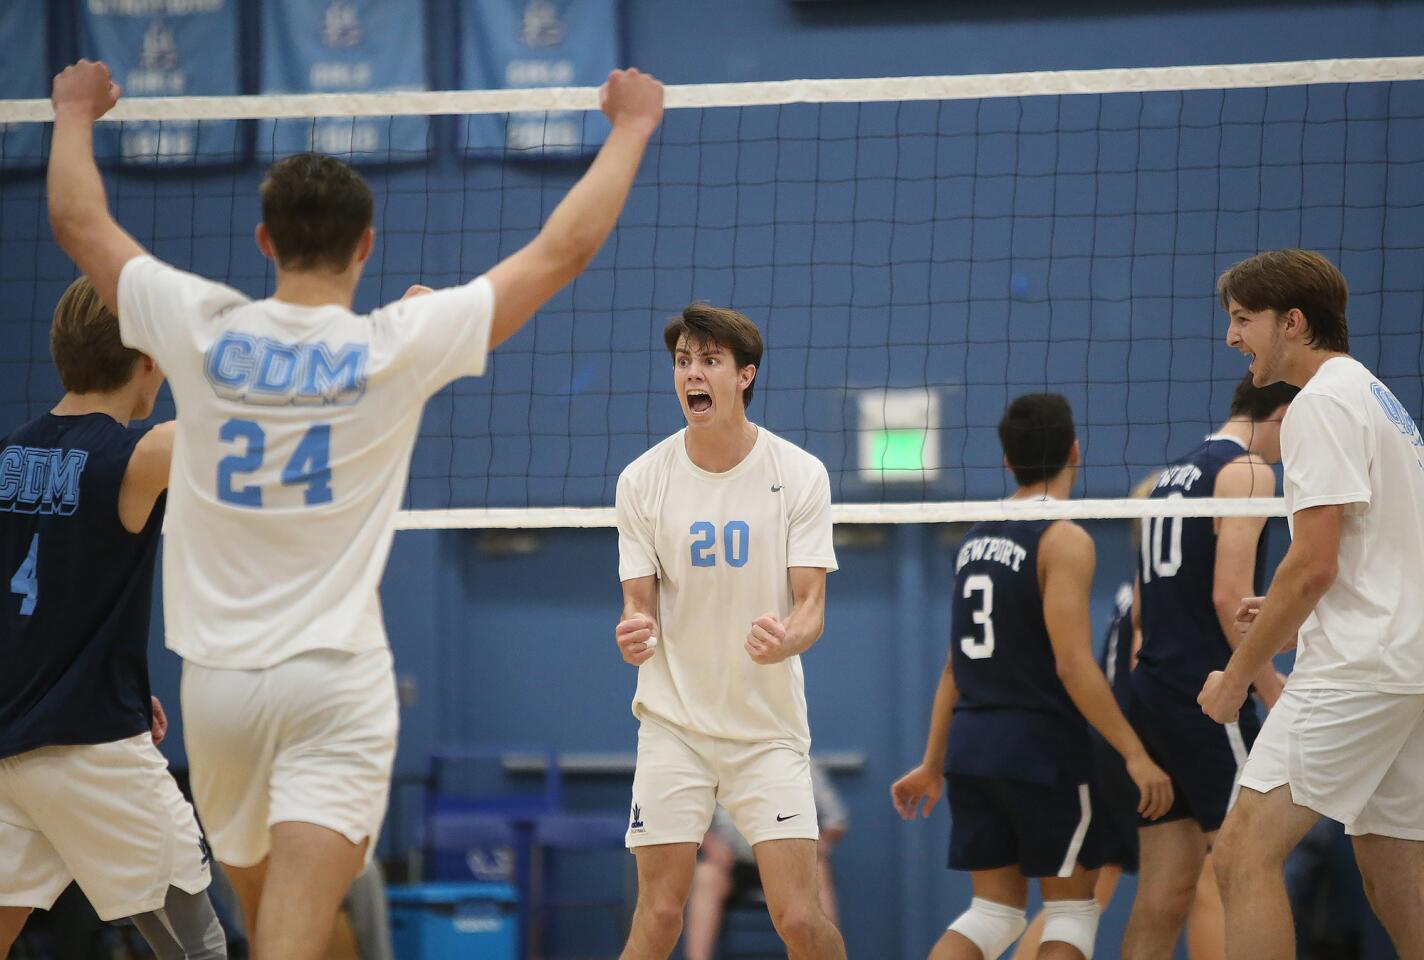 Corona Del Mar's Conner Zylstra (4) Shane Premer (24) and Adam Flood (20) celebrate winning game one during Battle of the Bay boys' volleyball match in Surf League play on Wednesday.